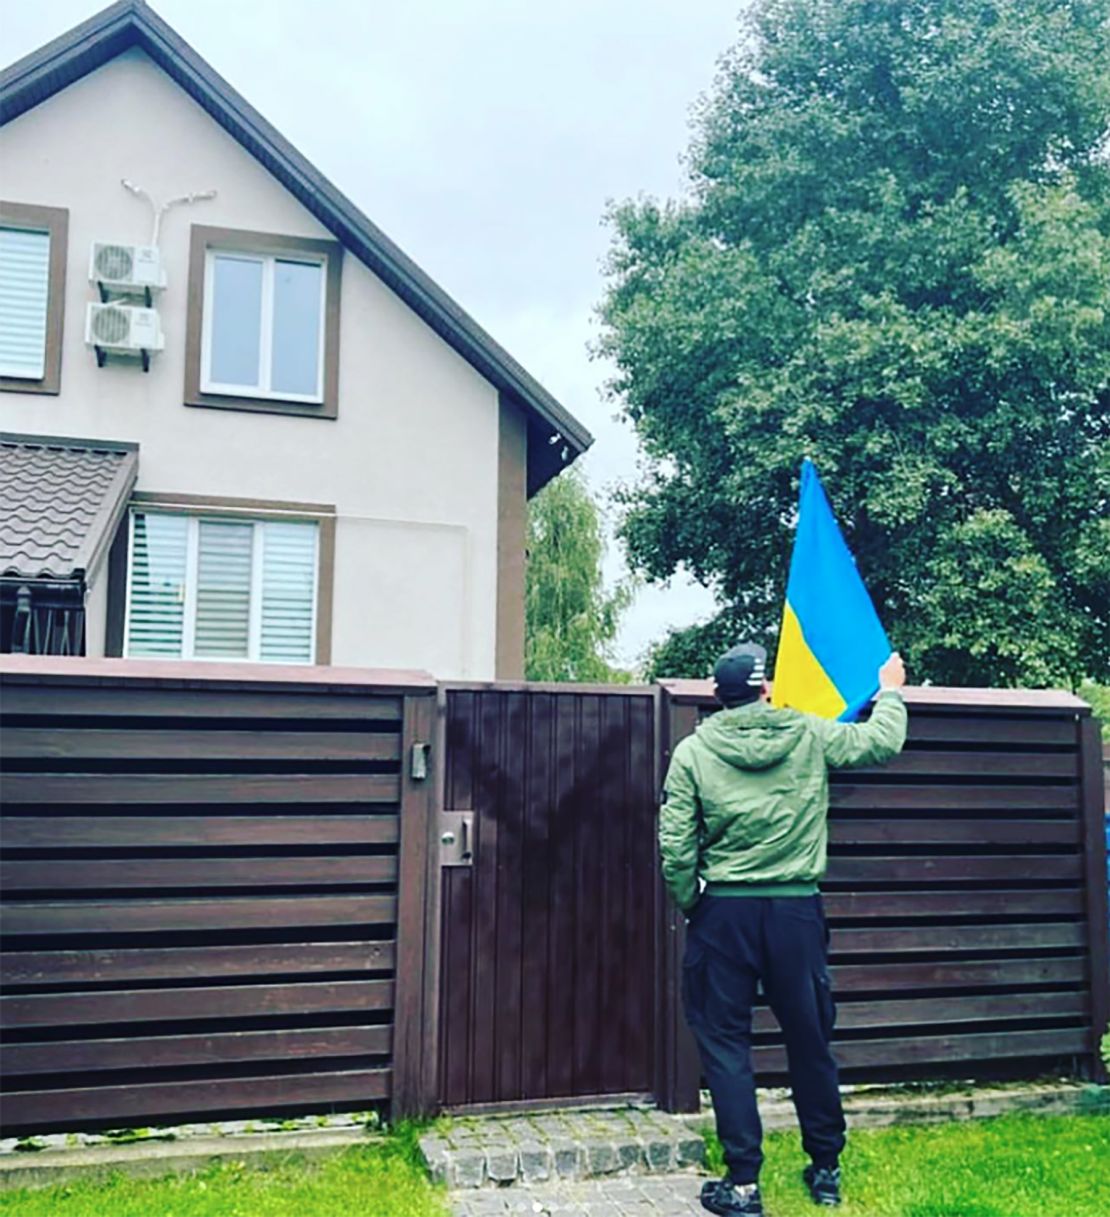 Usyk posted the photos of his house in an Instagram story.